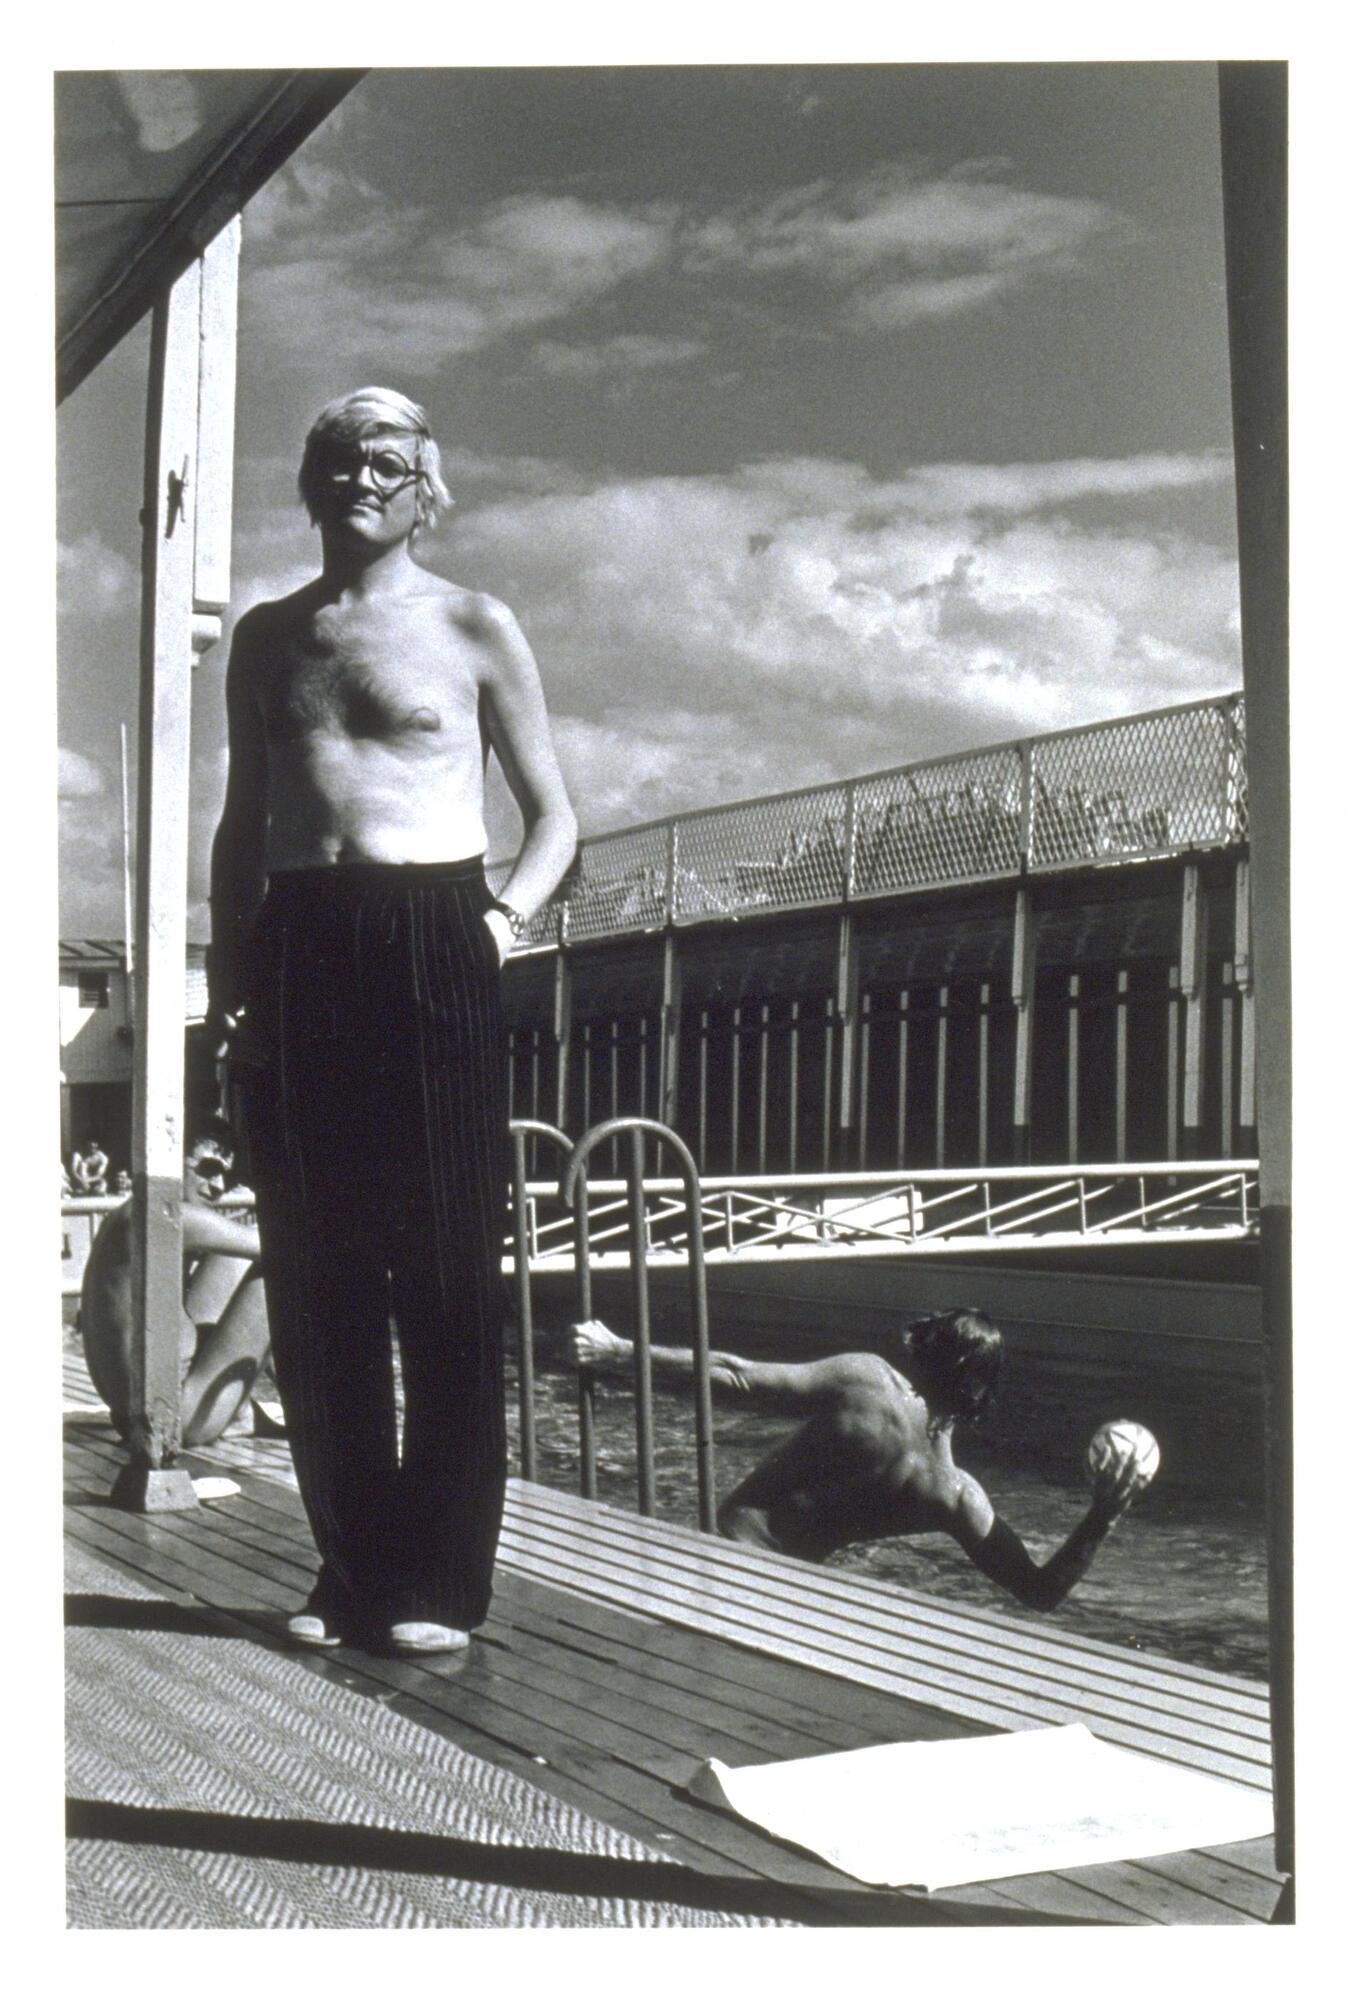 A photograph of man standing shirtless in front of a pool where others sunbathe and play water sports. 